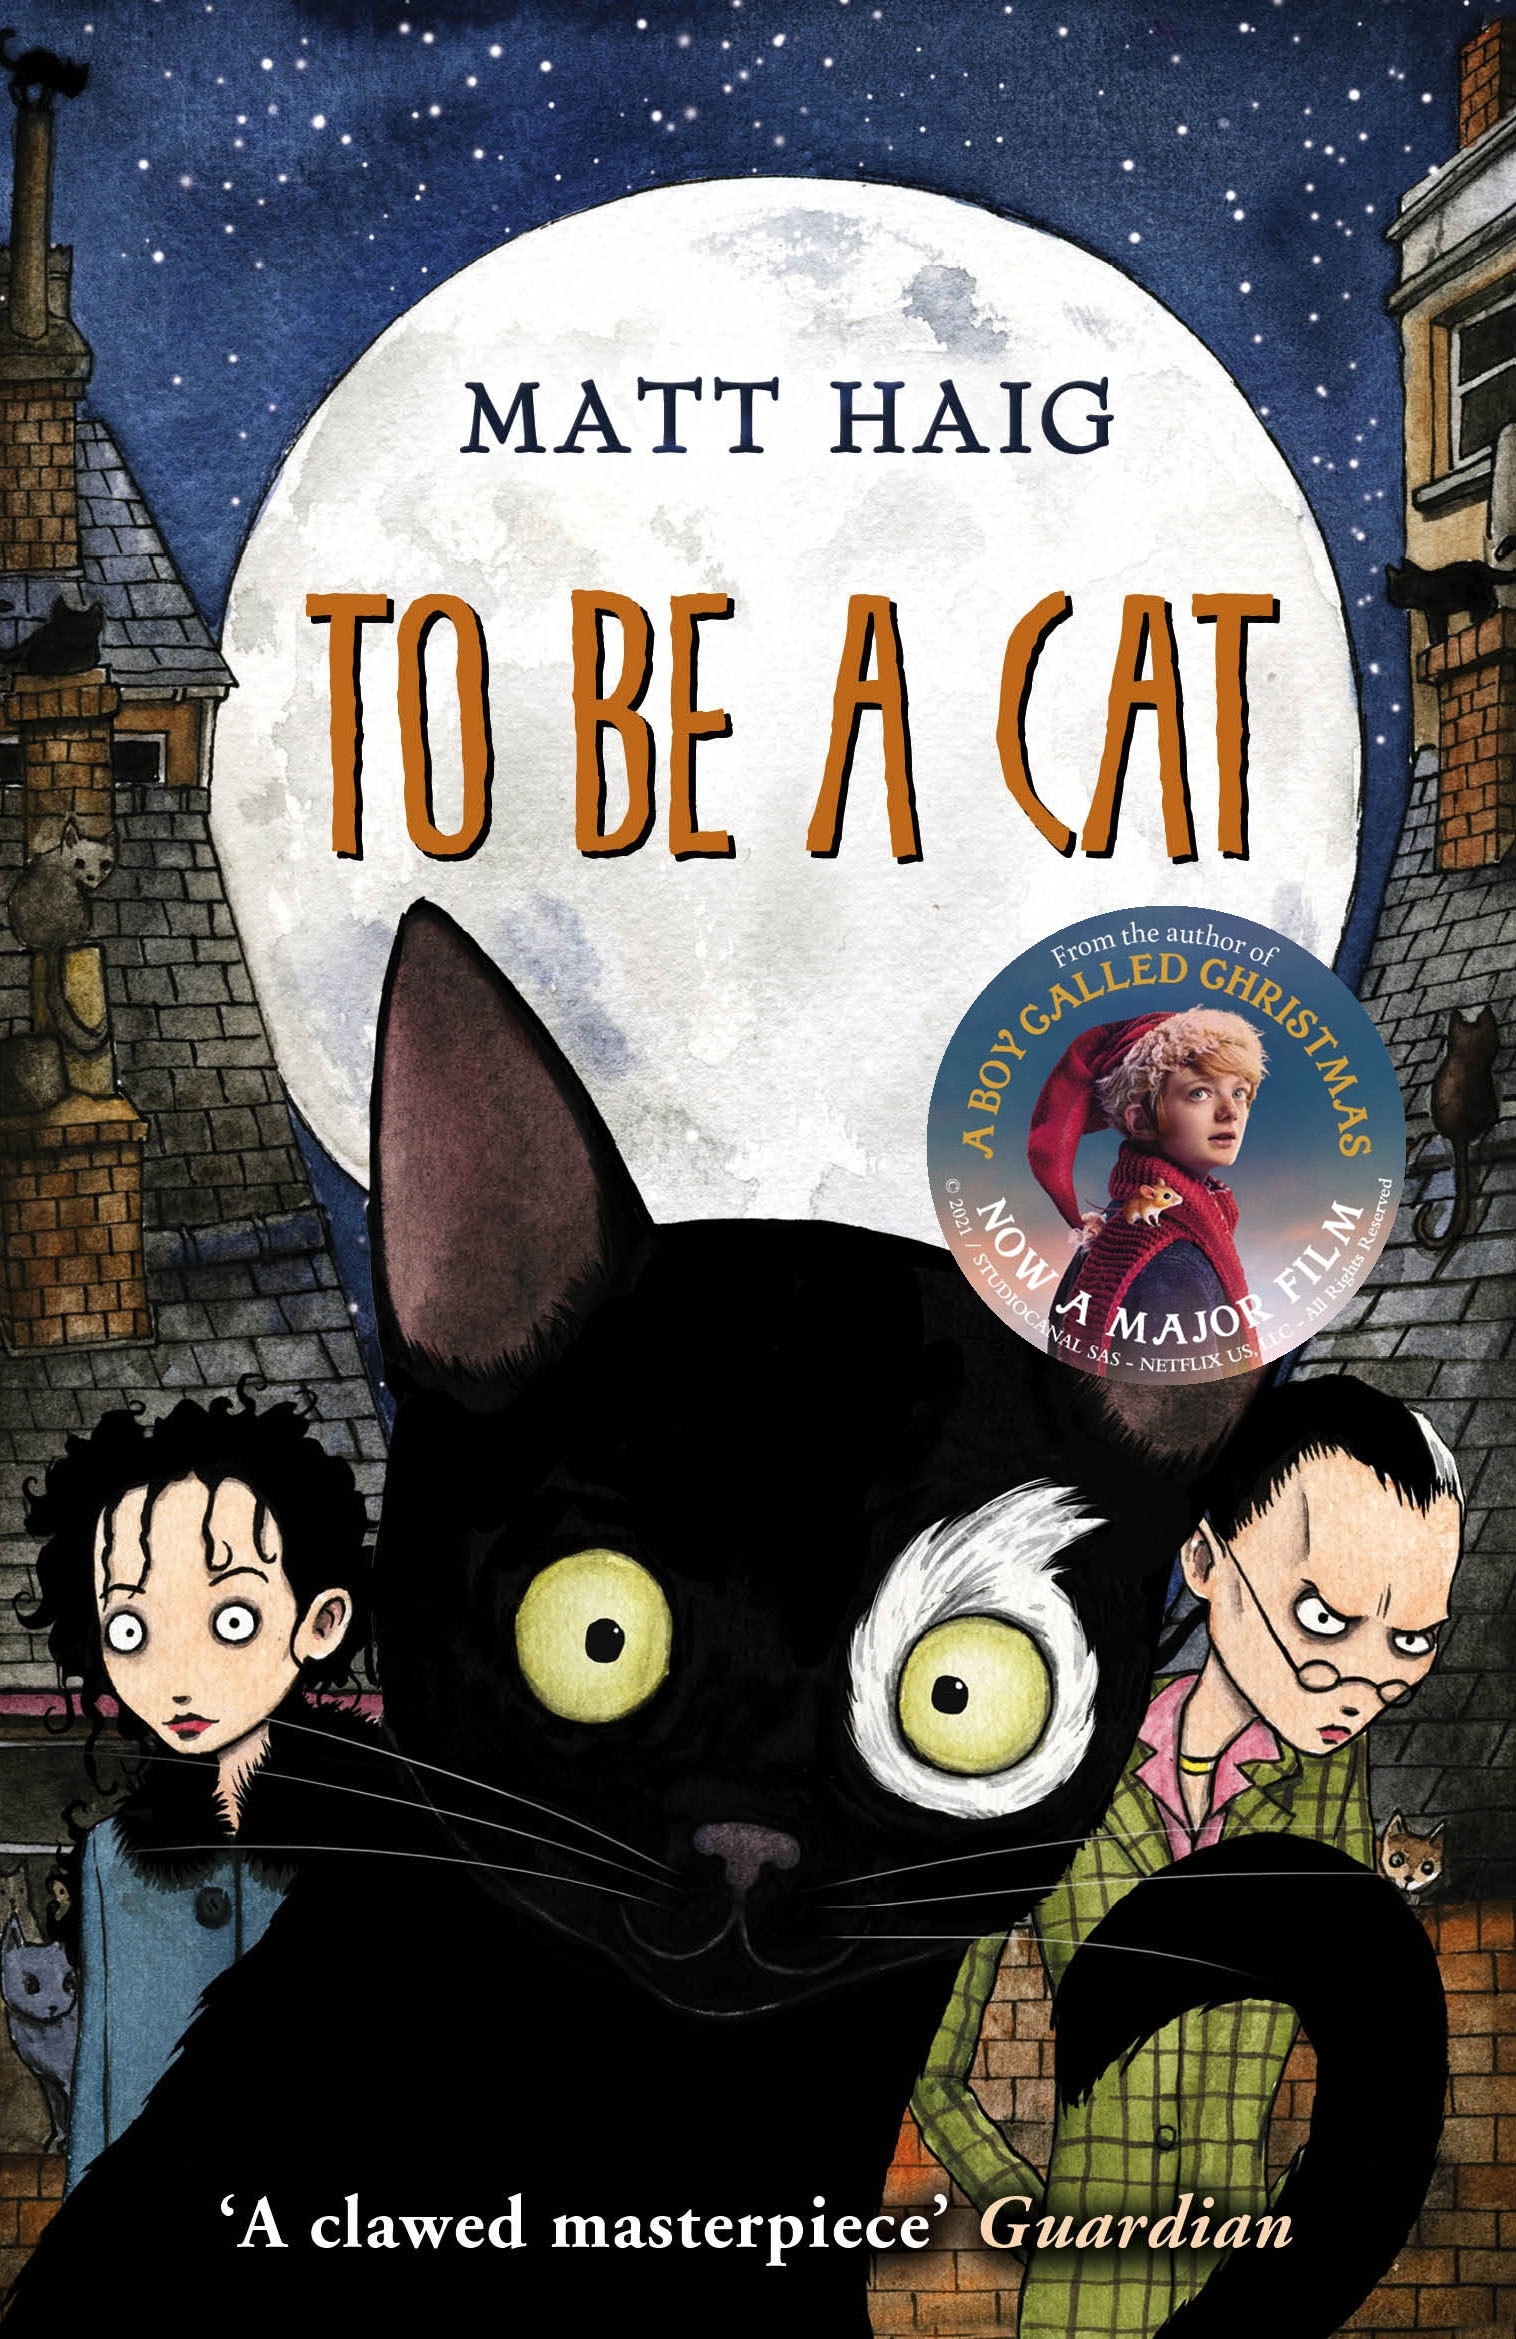 Book “To Be A Cat” by Matt Haig — May 2, 2013